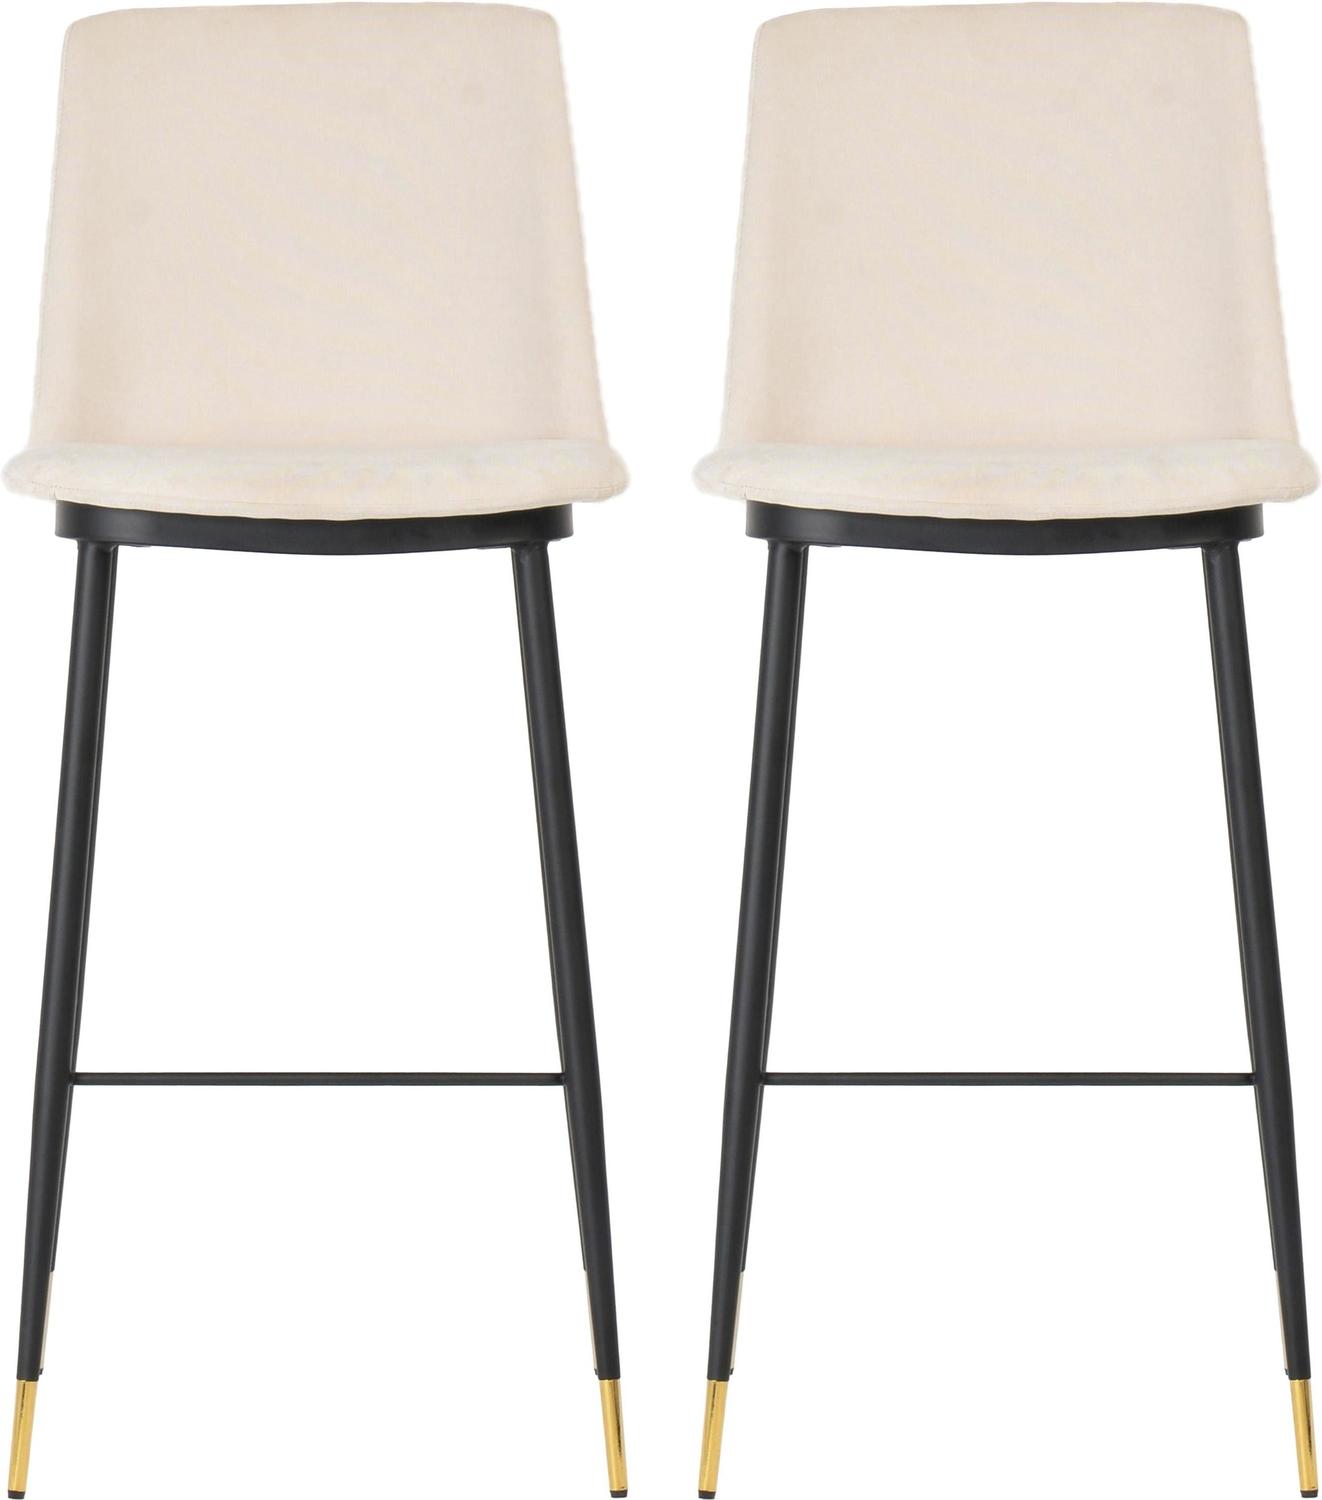 gold and black counter stools Tov Furniture Stools Bar Chairs and Stools Cream